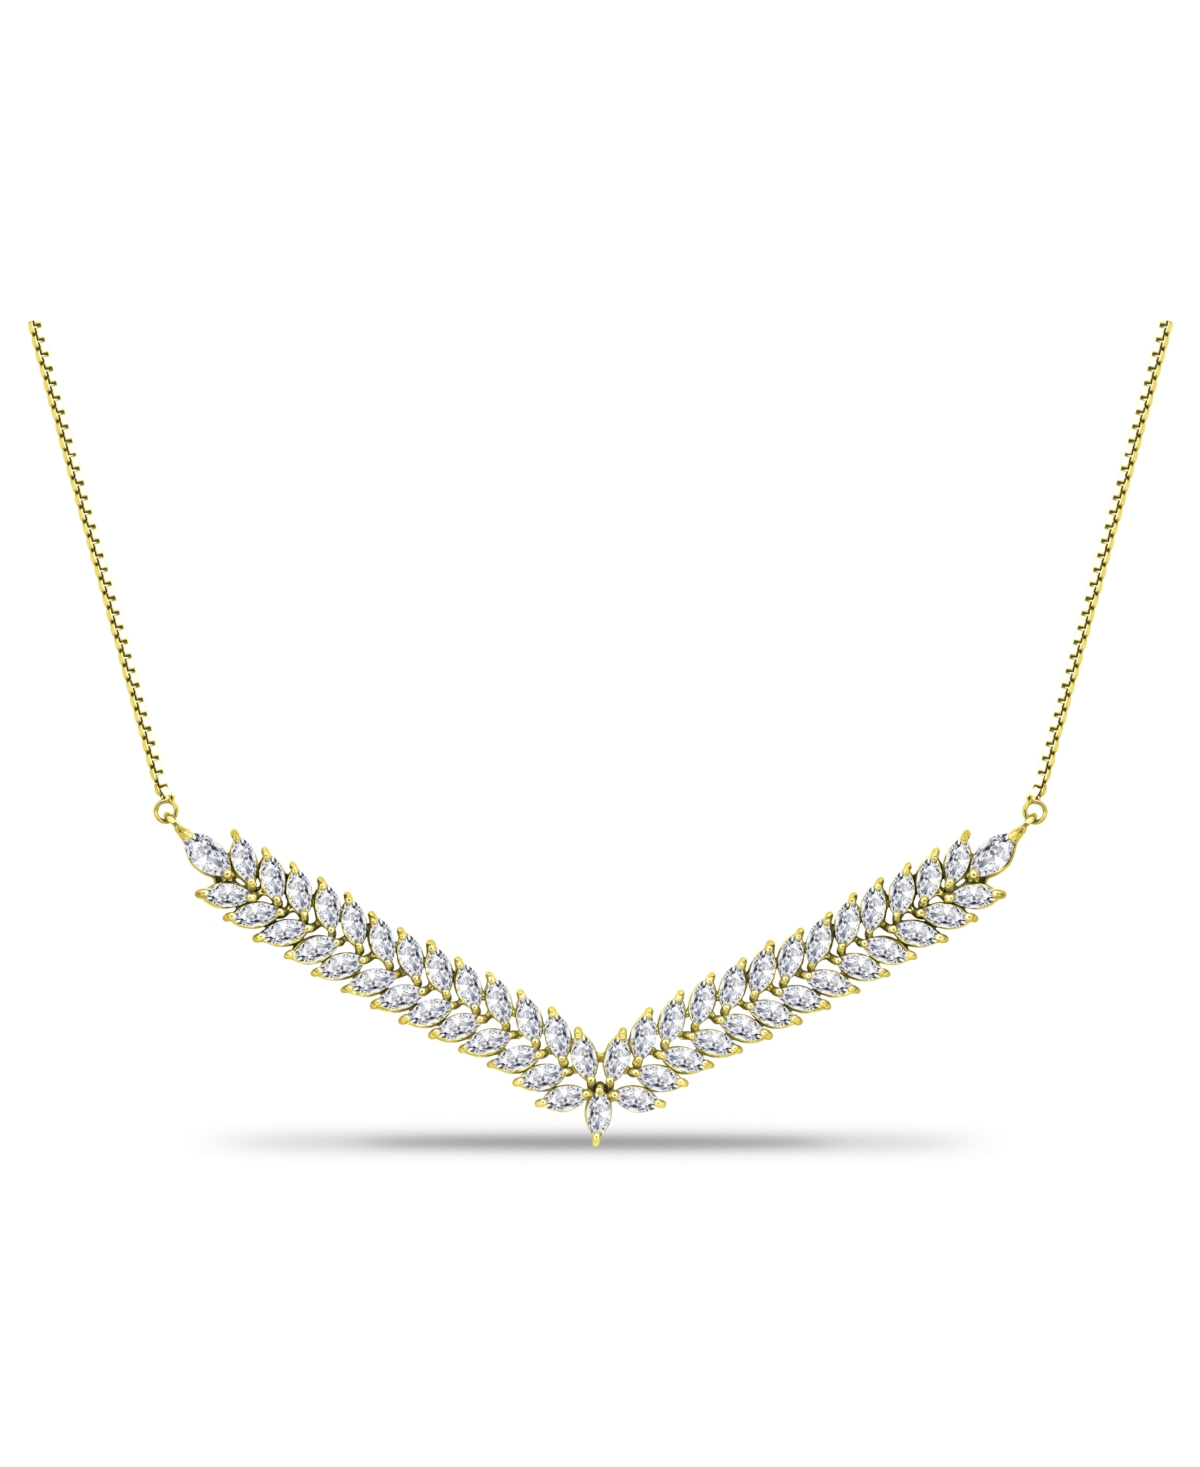 Macy's Marquise Stones Cubic Zirconia 2 Row V Frontal Adjustable Necklace (11.7 ct. t.w.) in 18K Sterling Silver or Sterling Silver